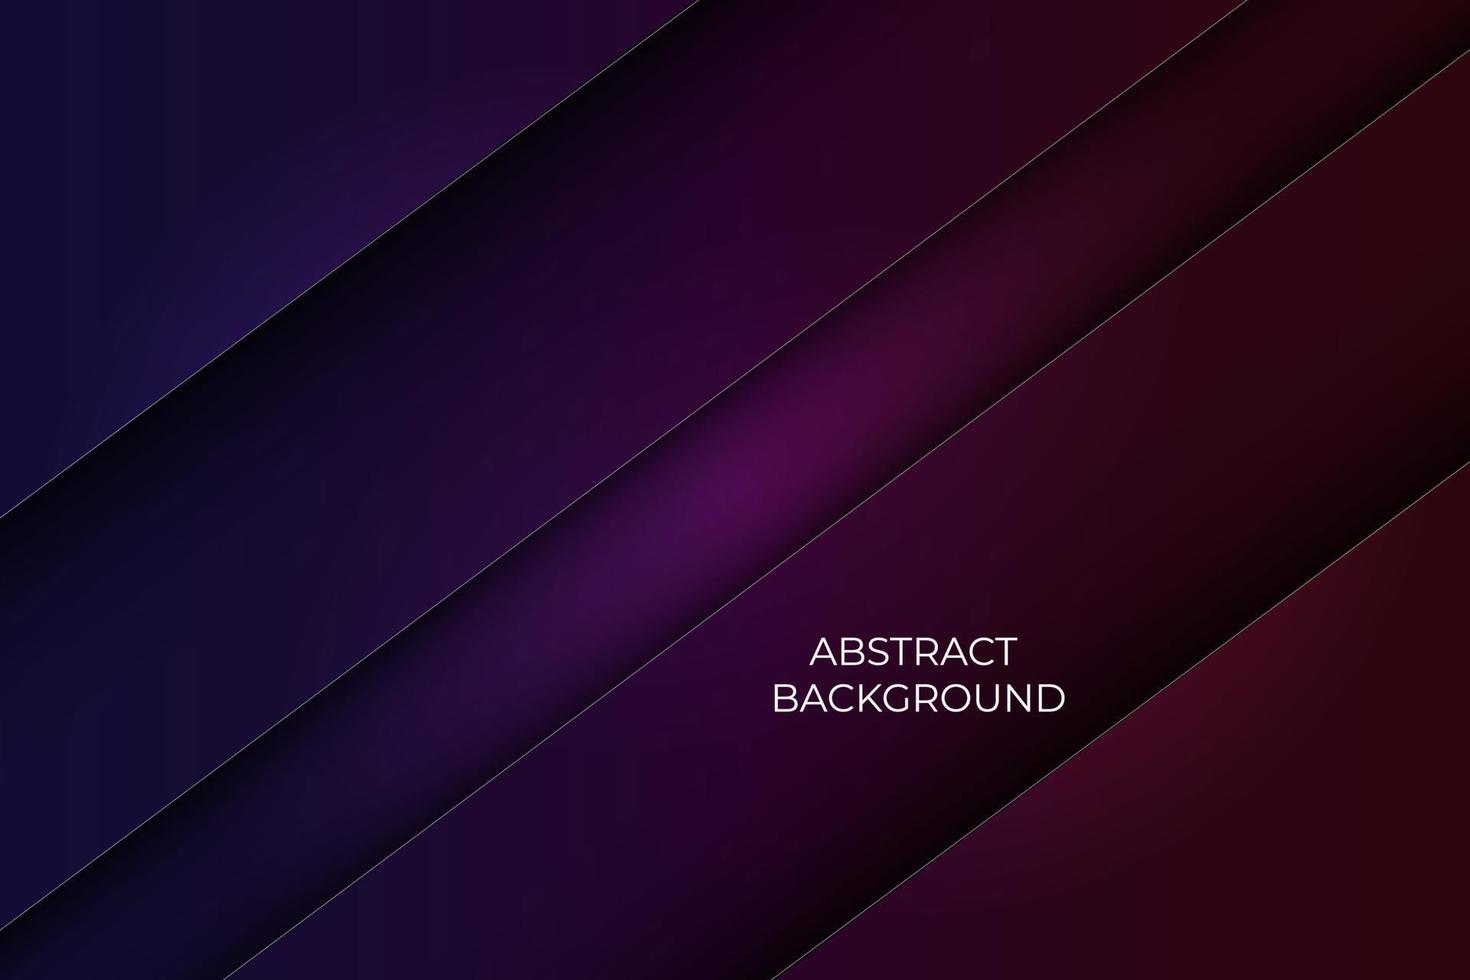 Abstract Background Geometry For banner And Business Presentation vector